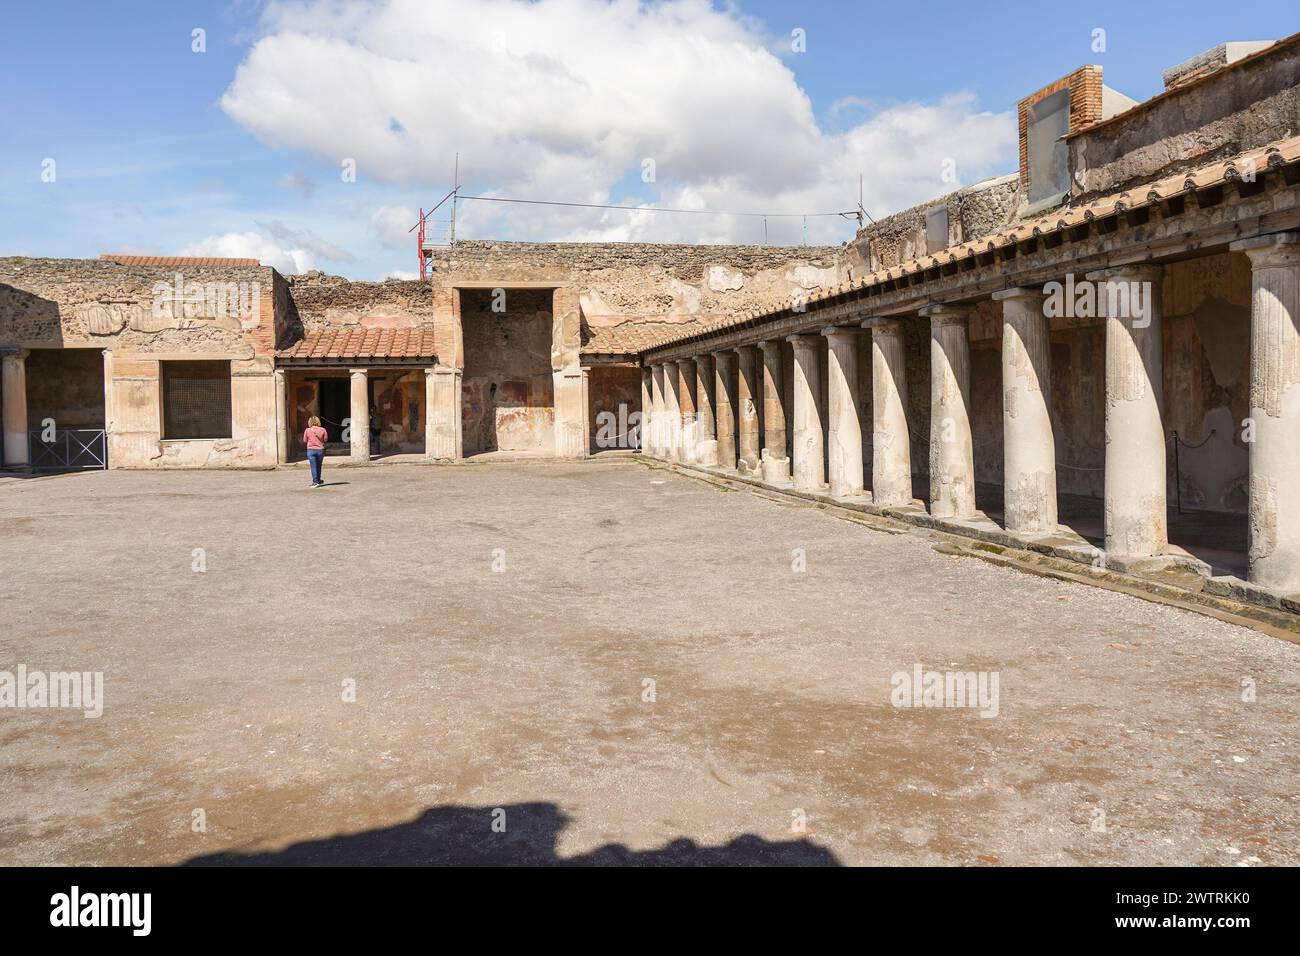 Square at the Stabian Baths, Terme Stabiane, bathhouse in the ancient city of Pompeii, Naples, Italy Stock Photo